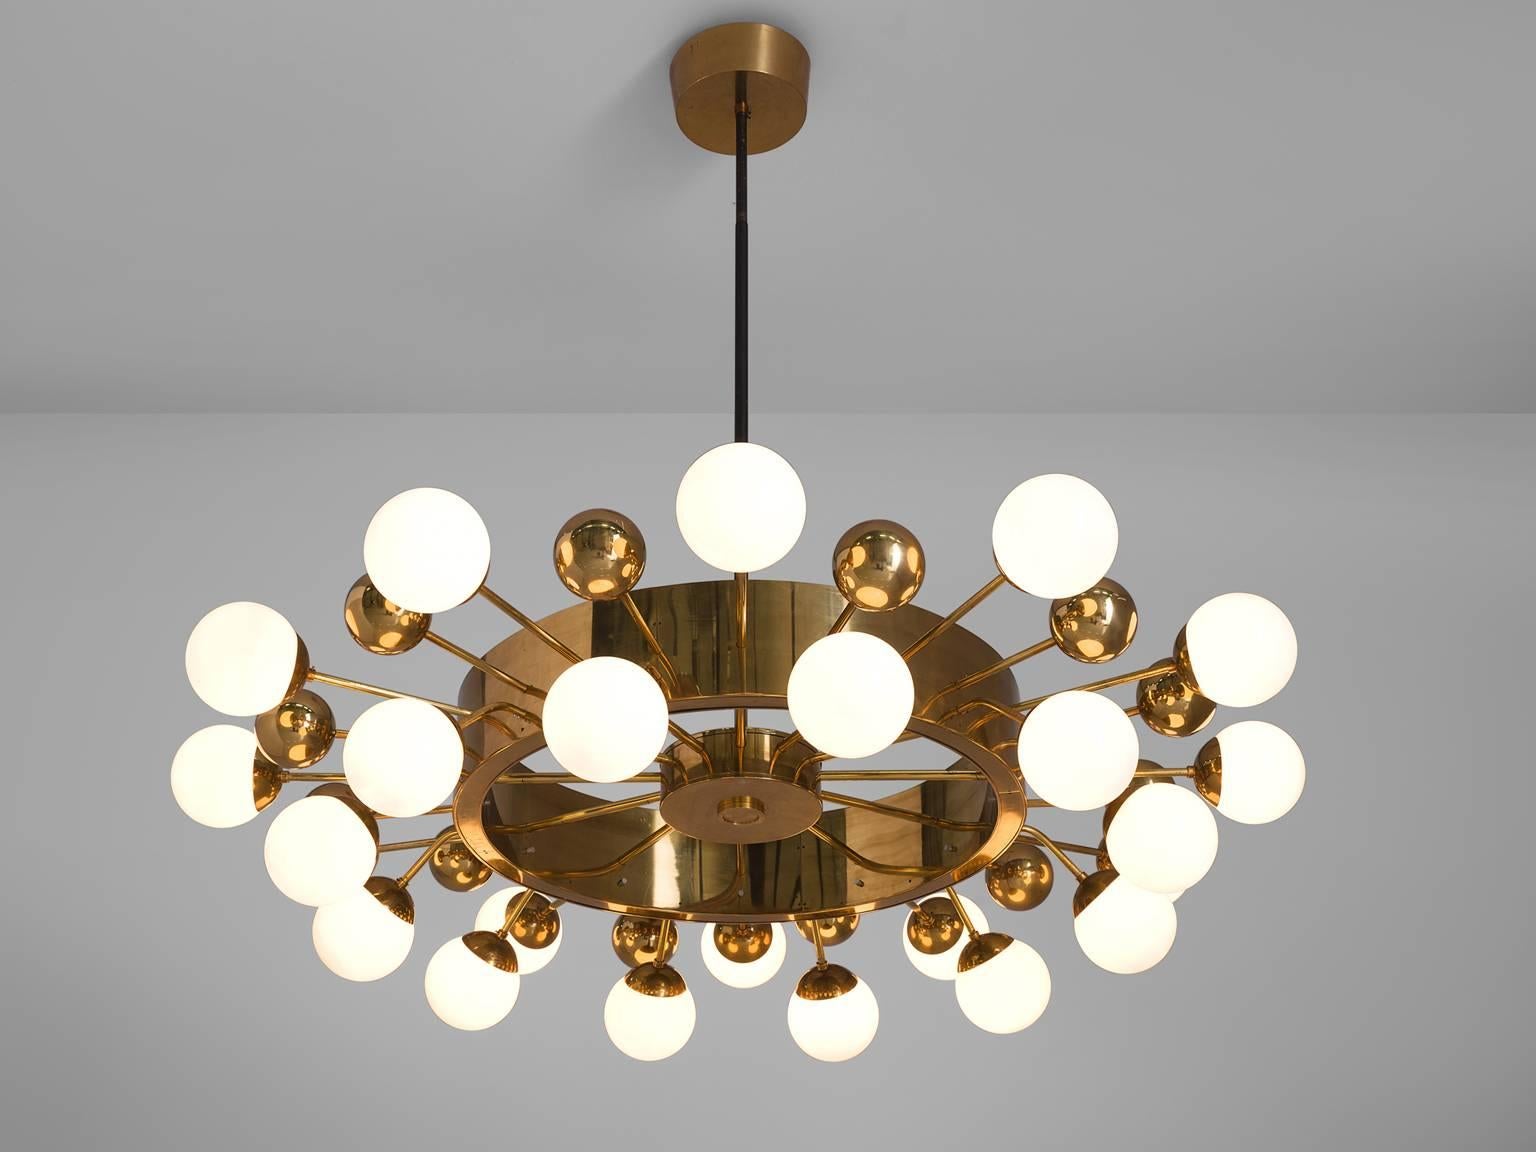 Large 2.2 mt / 7.2 ft sputnik handelier, in glass and brass, Europe, 1960s.

This sputnik chandelier is part of the midcentury design collection. The grand chandelier is executed with a brass fixture and opaline glass spheres. The chandelier exists